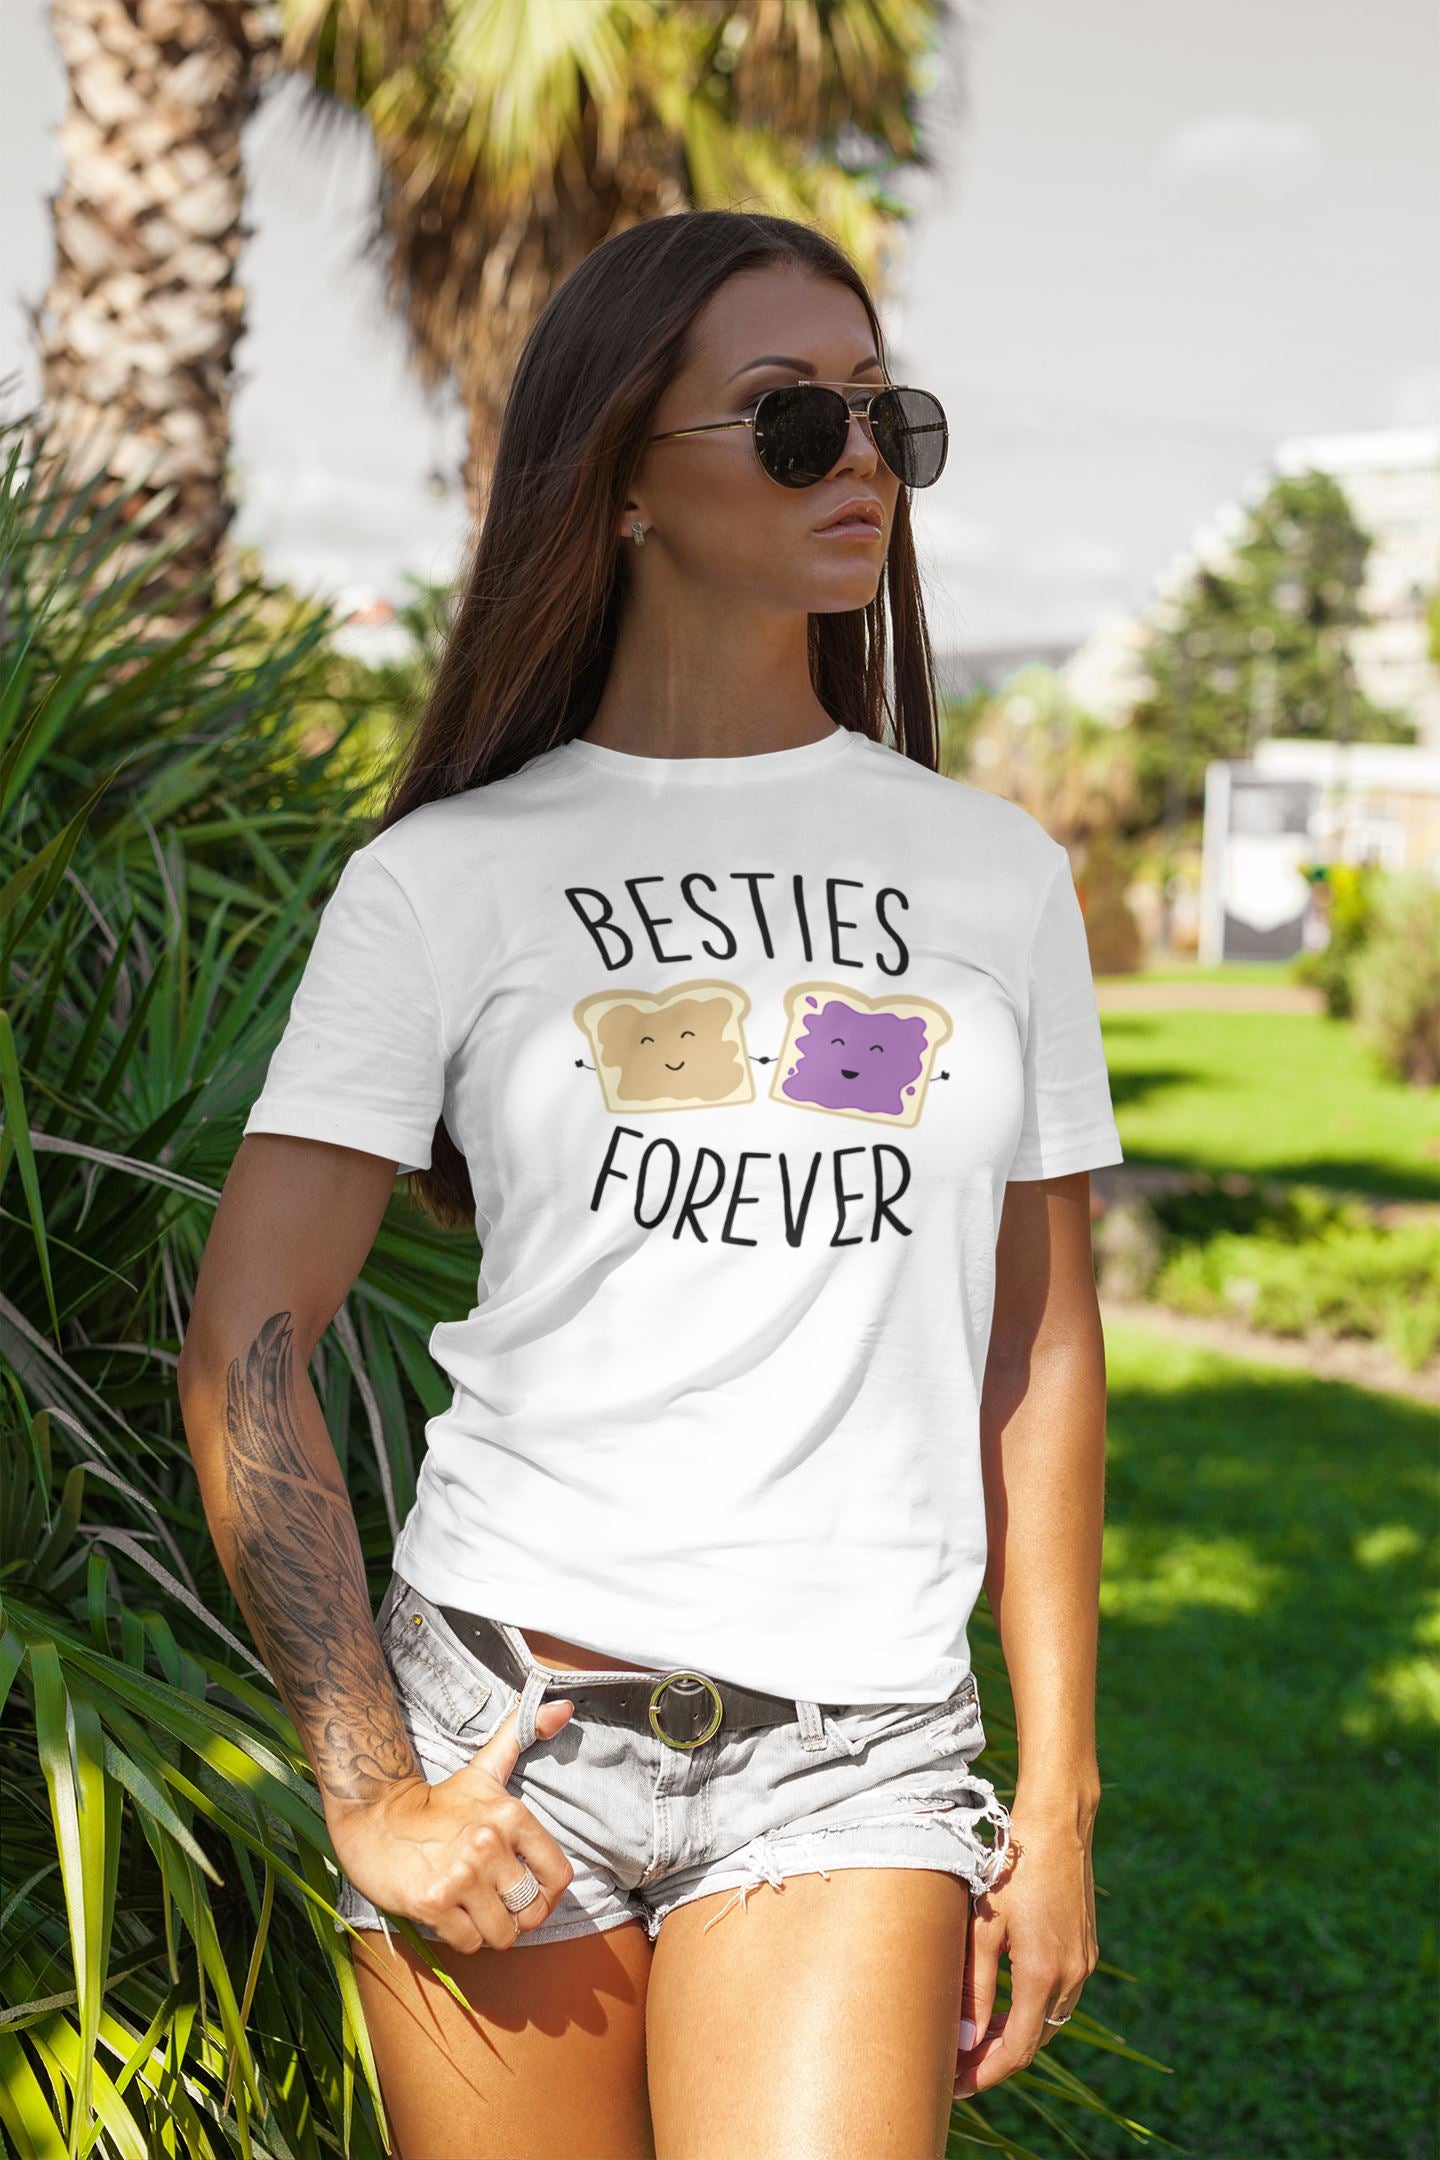 Besties Forever Like Peanut Butter and Jelly Special White T Shirt for Men and Women (Friends, Couples, Parents) freeshipping - Catch My Drift India